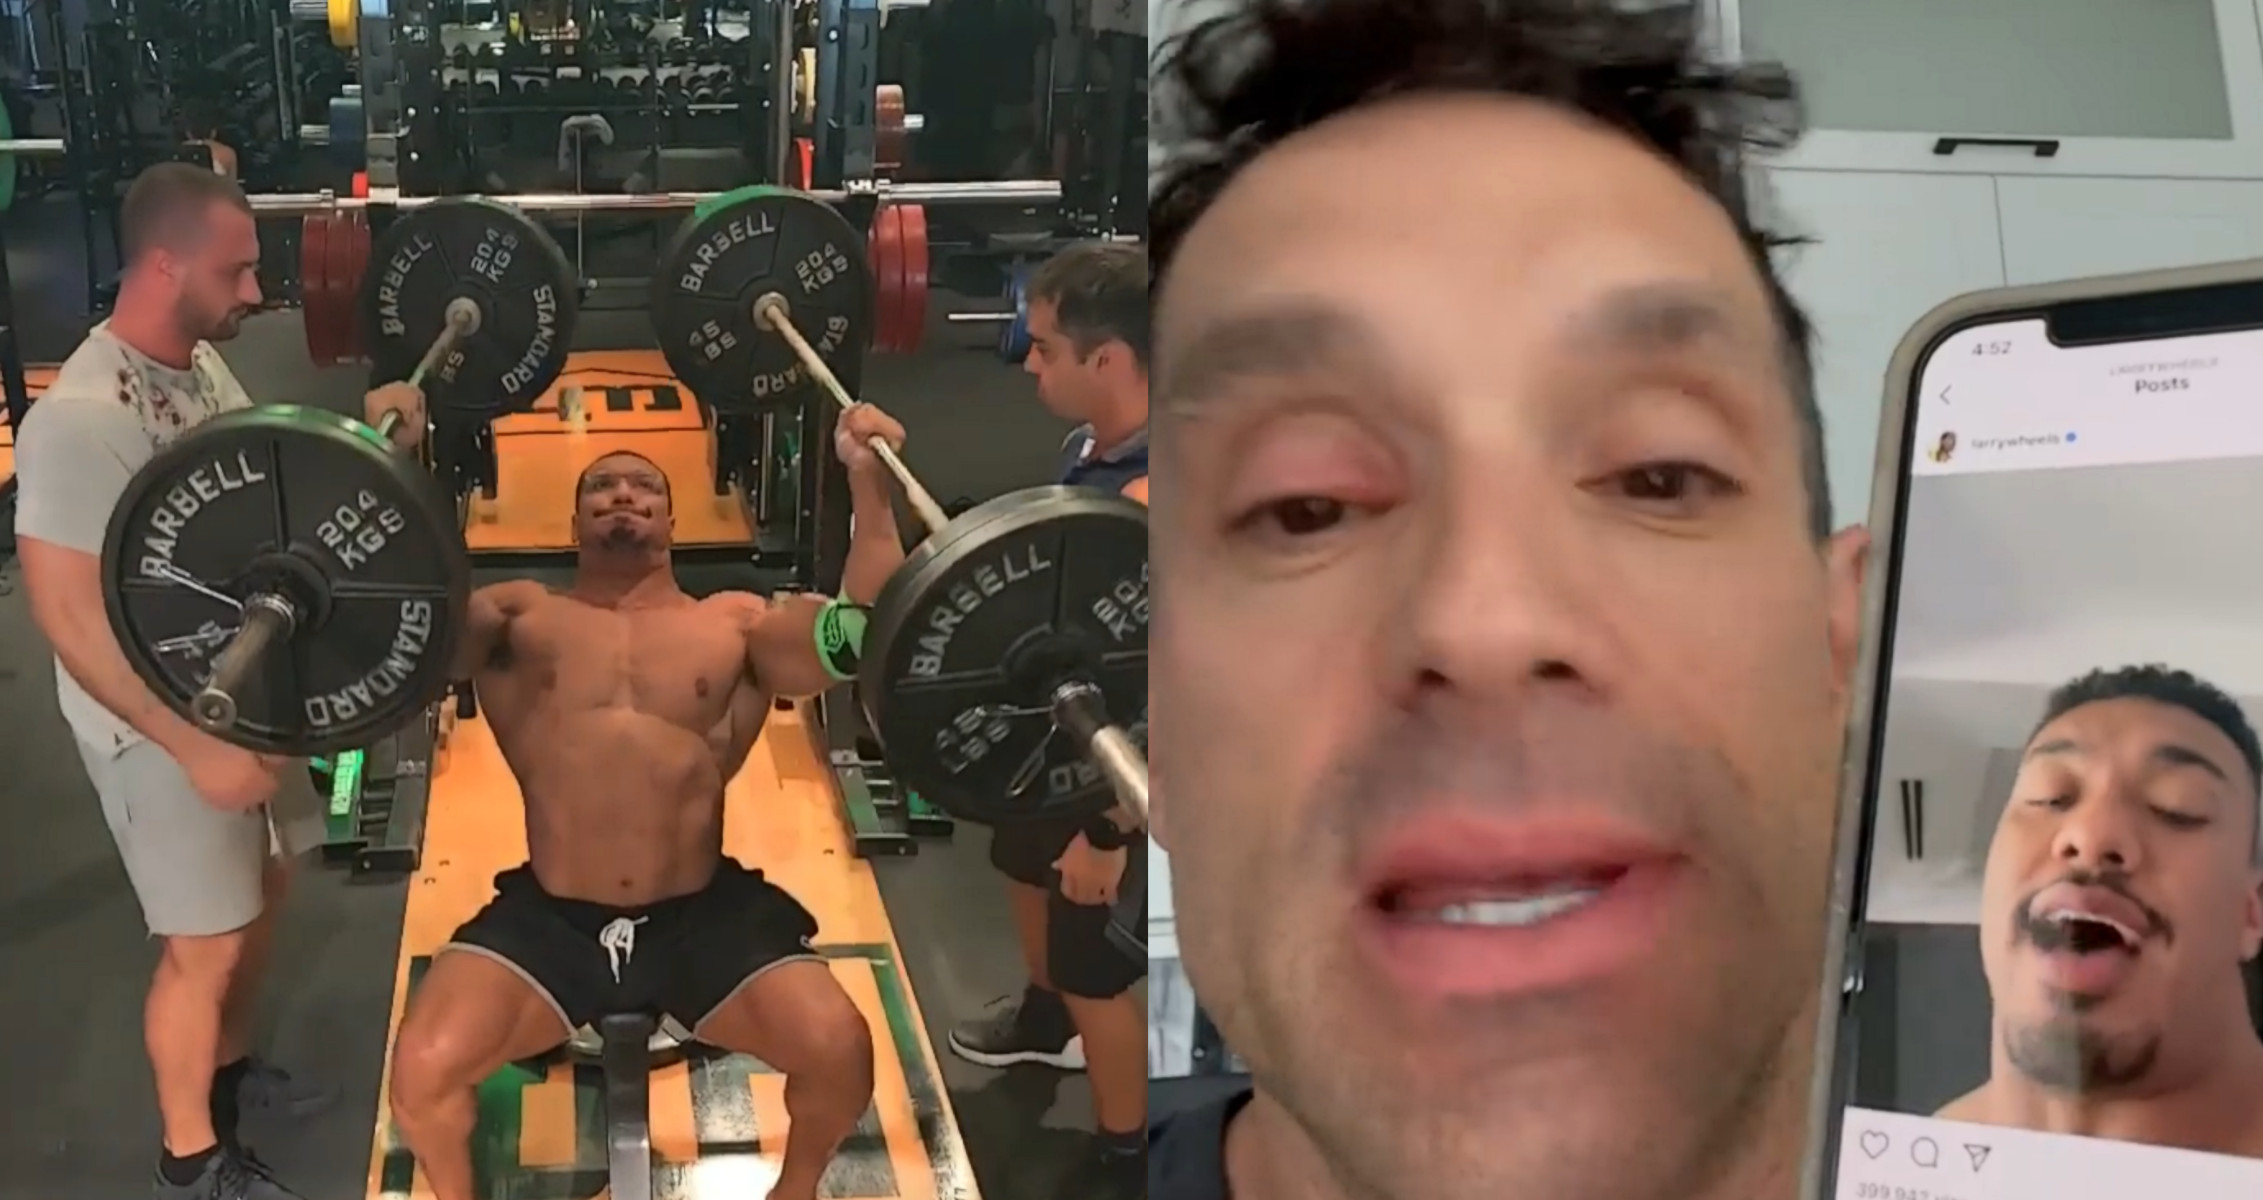 Greg-Doucette-Calls-Out-Larry-Wheels-For-Allegedly-Using-Fake-Weights.jpg